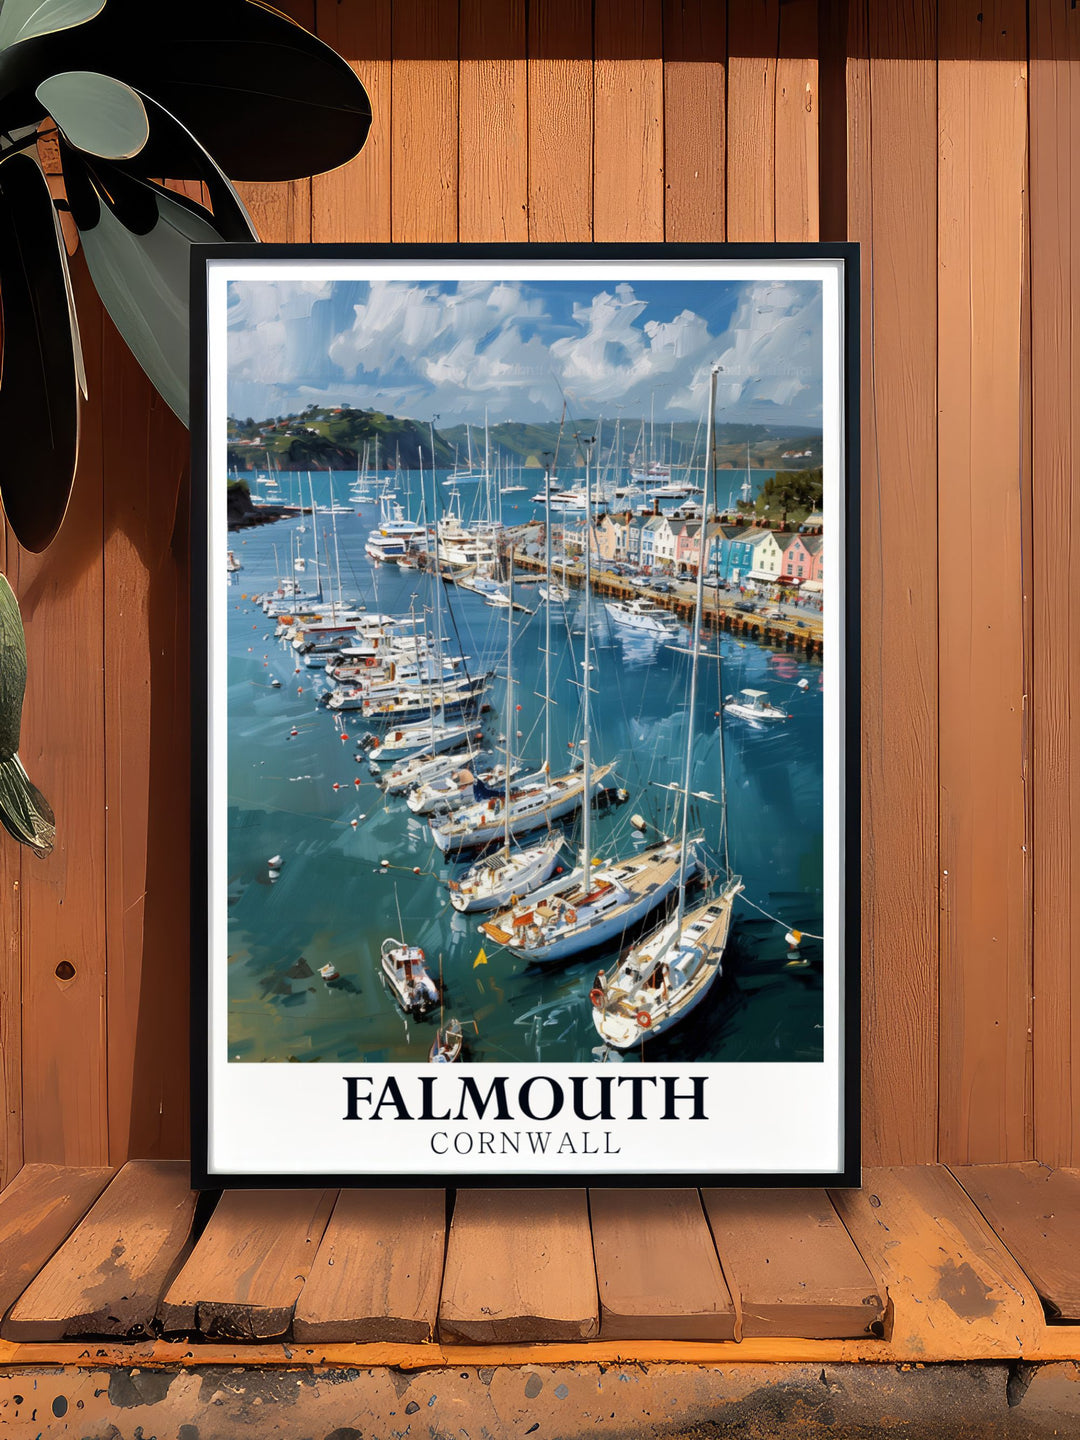 Captivating Falmouth Harbour vintage print capturing the beauty and vitality of Cornwalls famous port. Ideal for any art enthusiast, this piece adds character and a touch of coastal elegance to any space, making it a worthy investment.